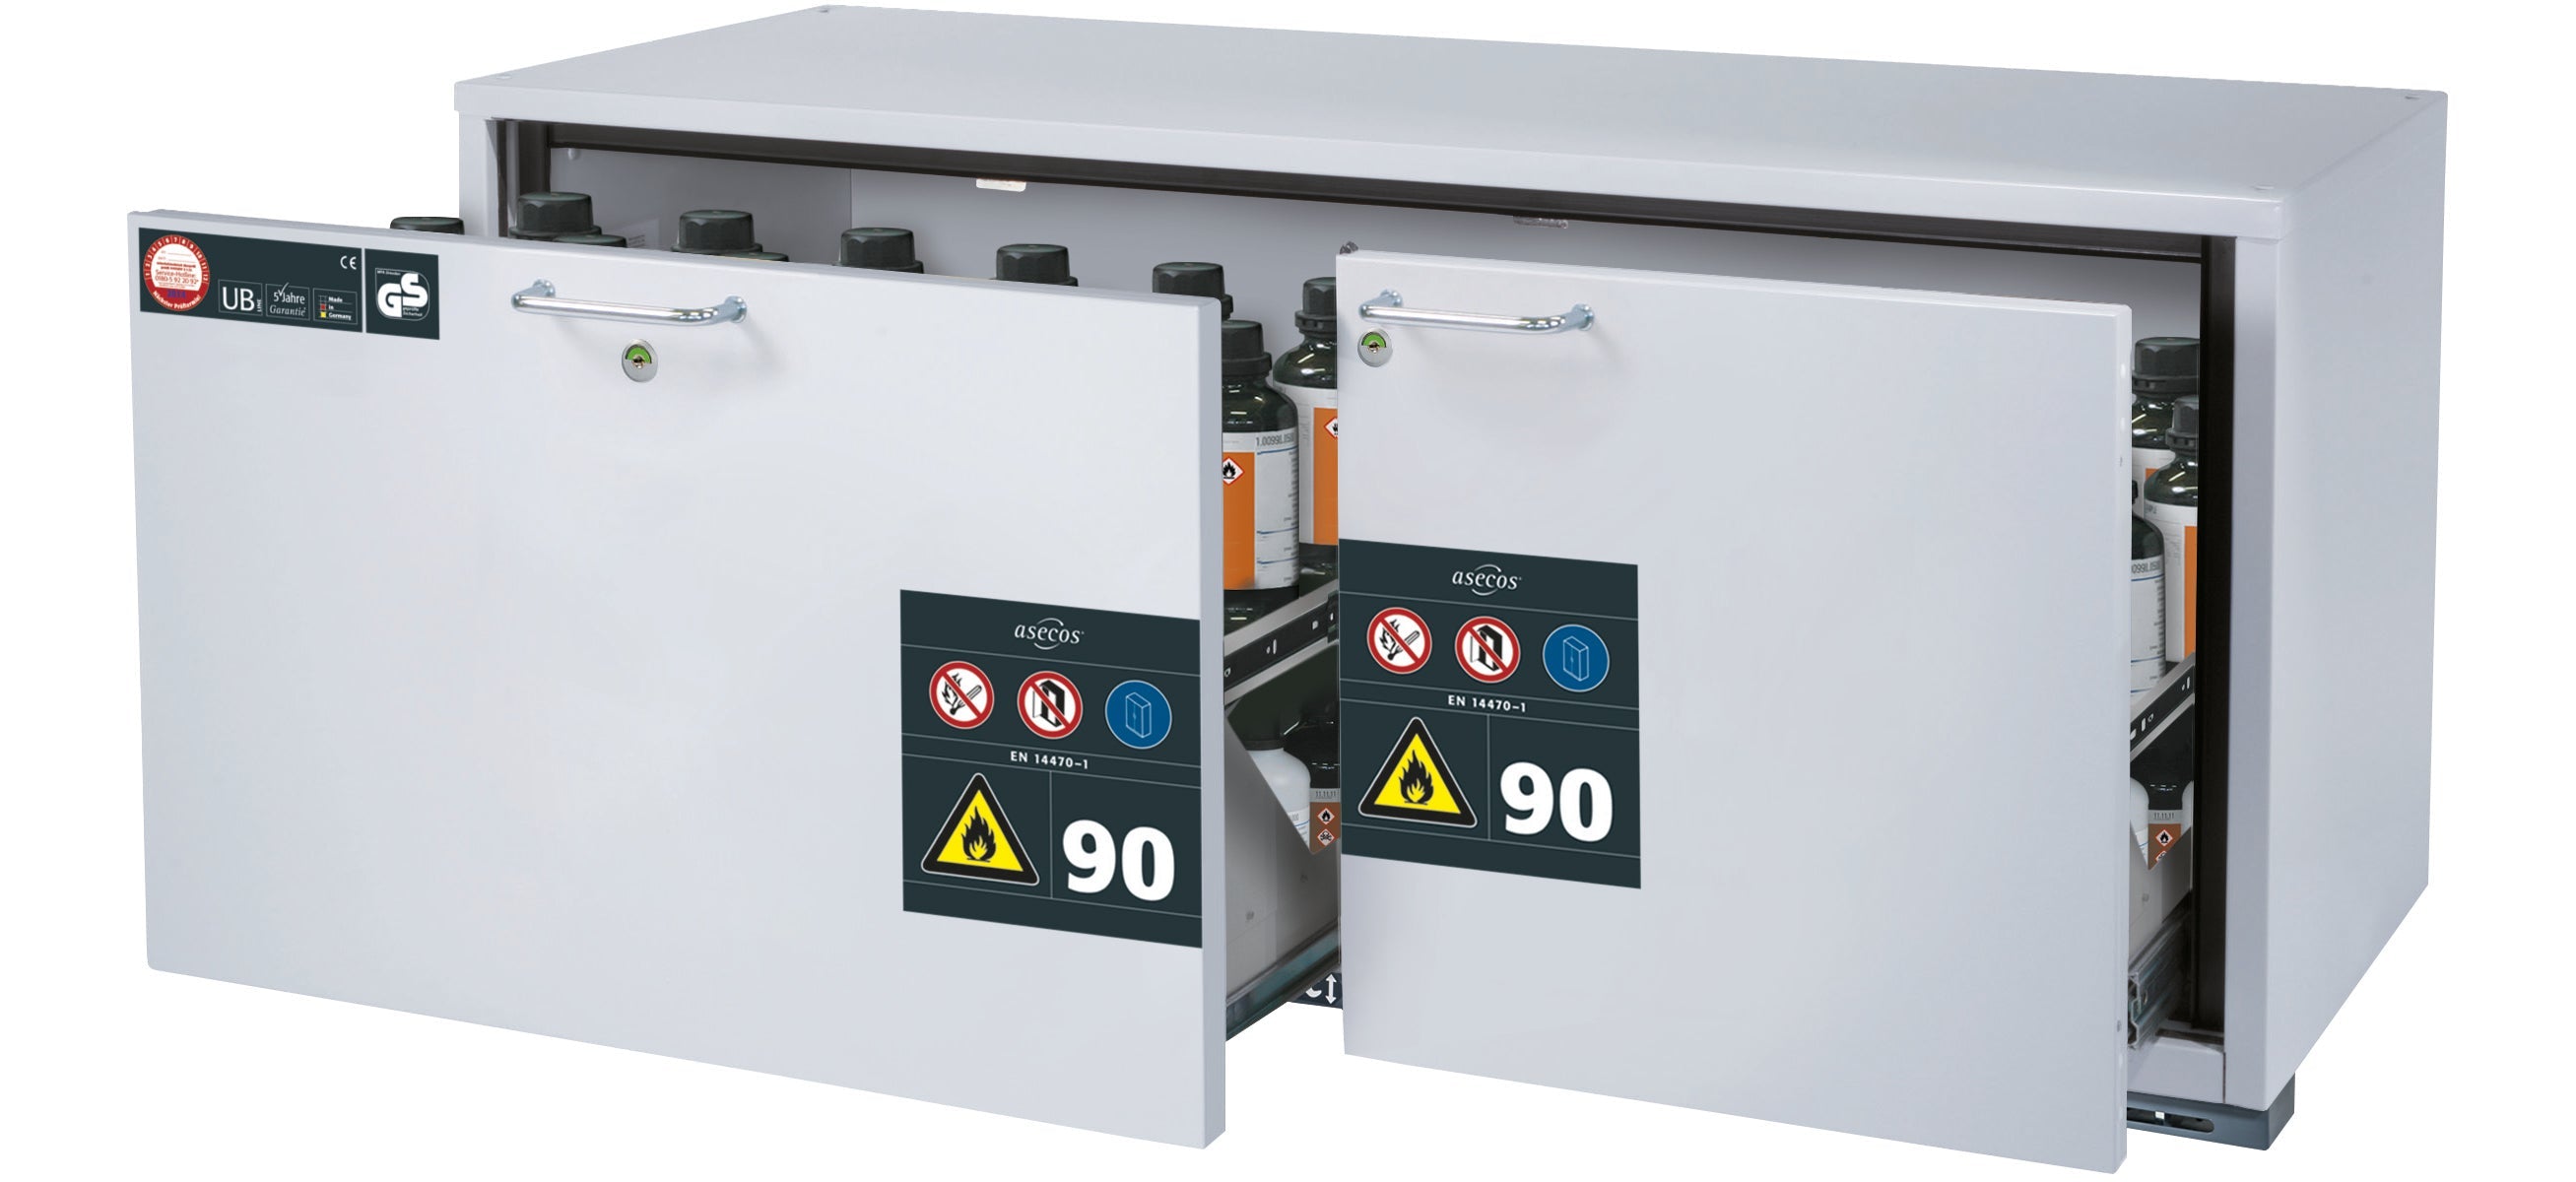 Type 90 safety base cabinet UB-S-90 model UB90.060.140.2S in light gray RAL 7035 with 2x drawer tray STAWA-R (stainless steel 1.4301)